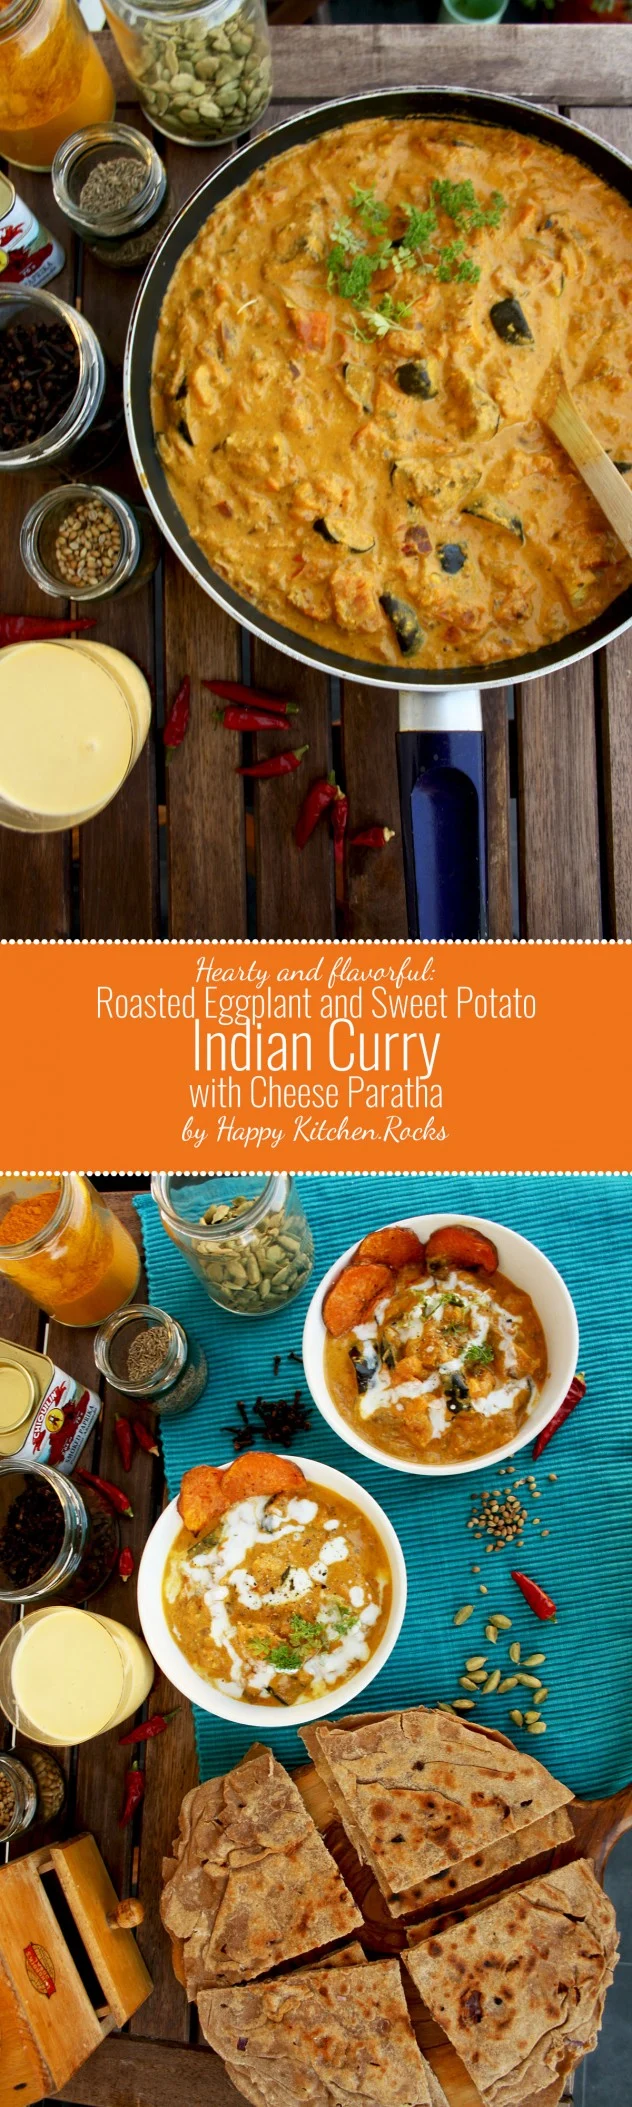 Pinterest Image Eggplant Curry with Sweet Potatoes